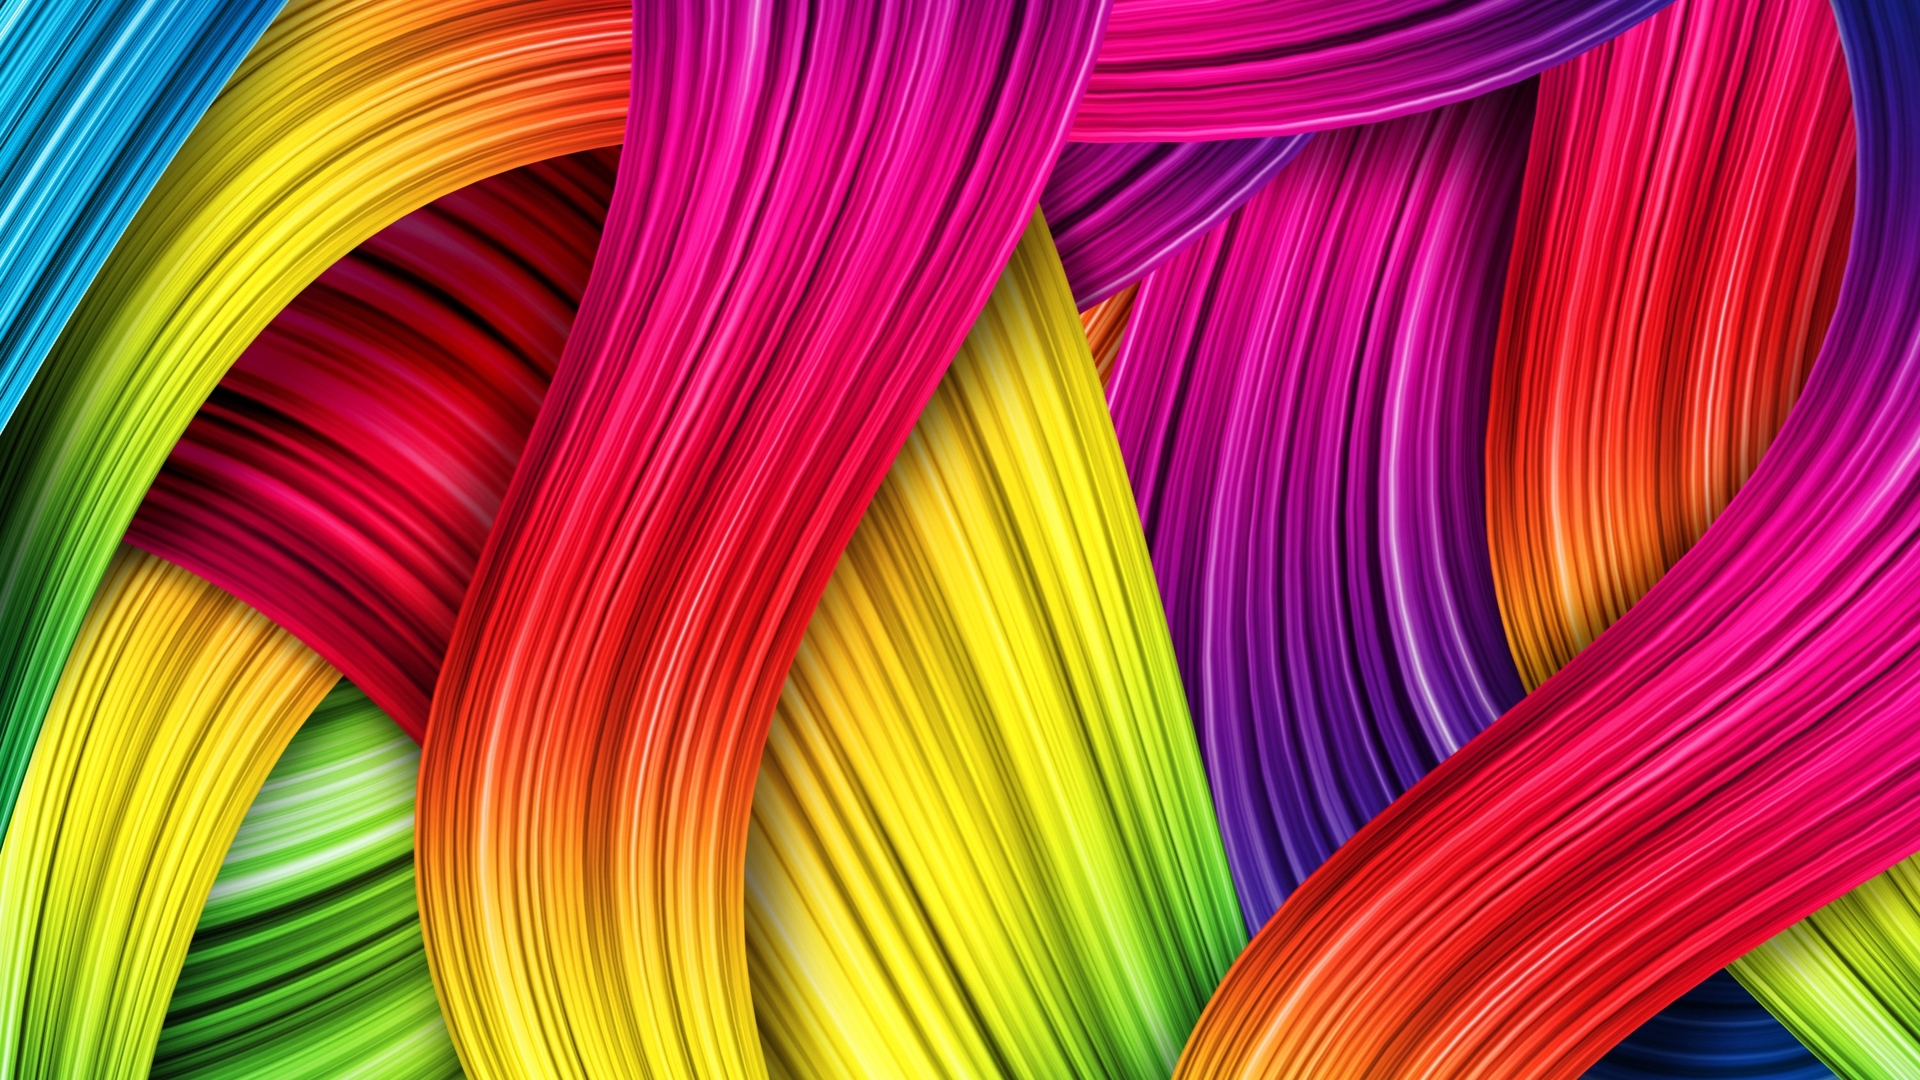 10 Best Colorful Desktop Backgrounds Hd FULL HD 1080p For PC Background